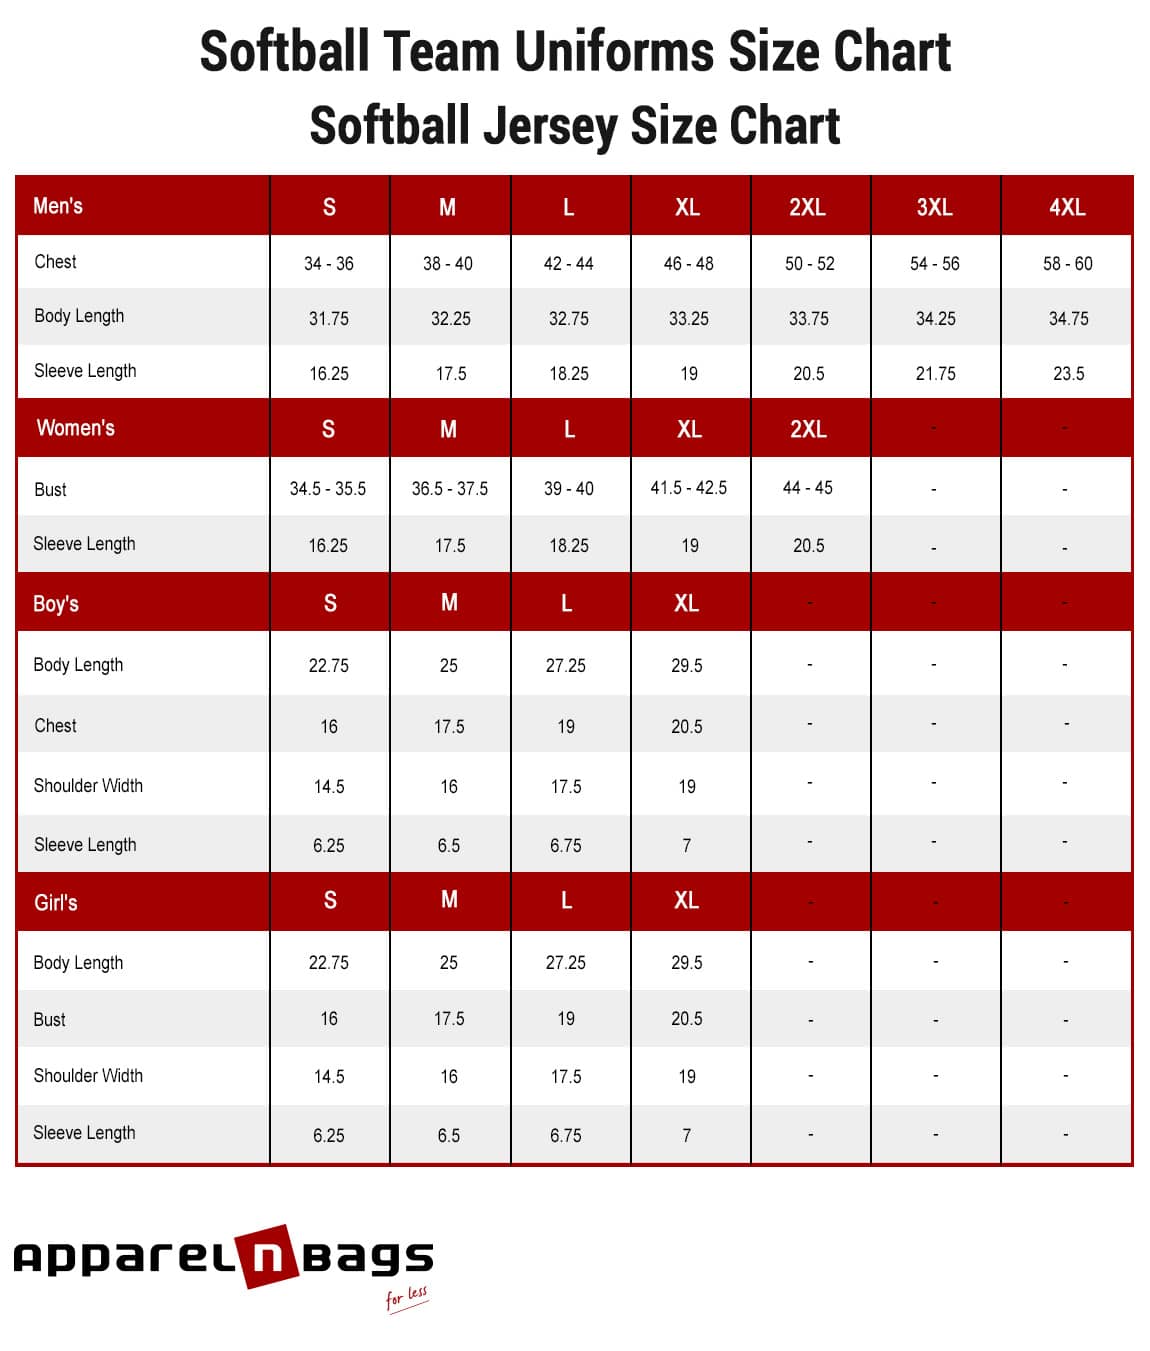 Accurate Softball Jerseys Size Chart and Measurements Guide